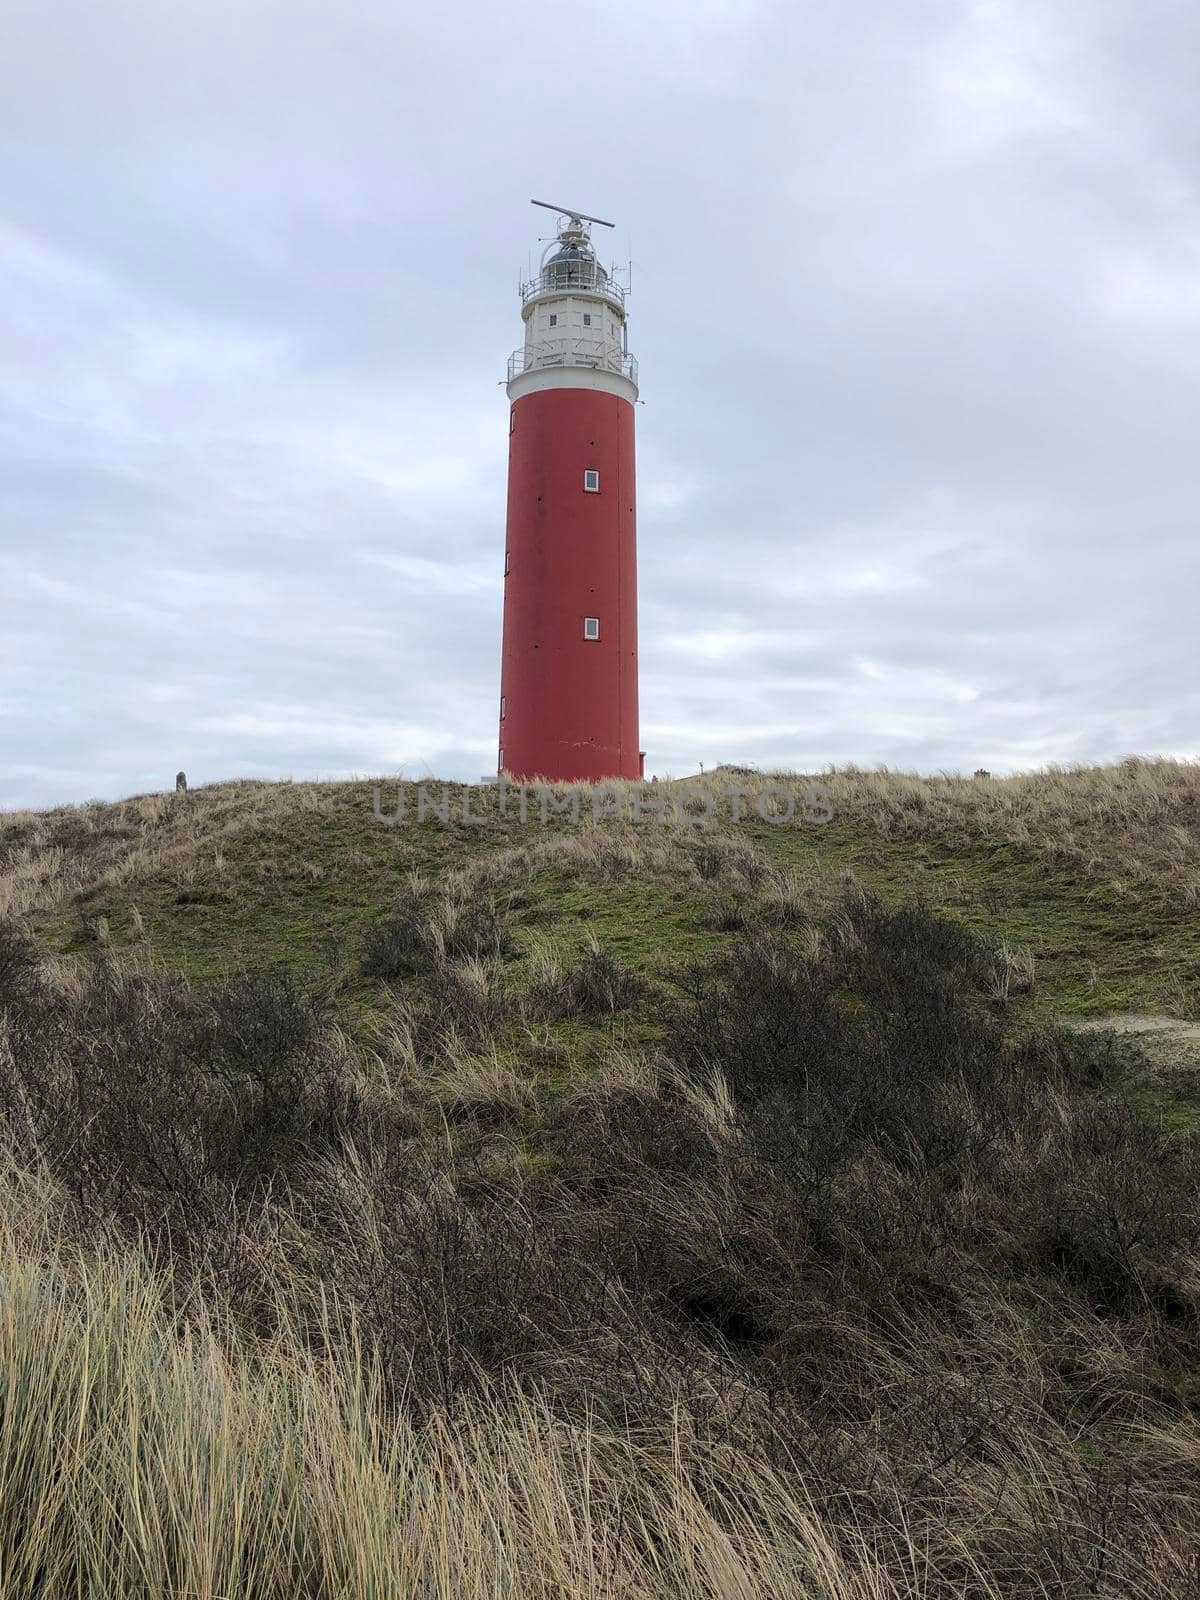 The lighthouse on Texel island in The Netherlands